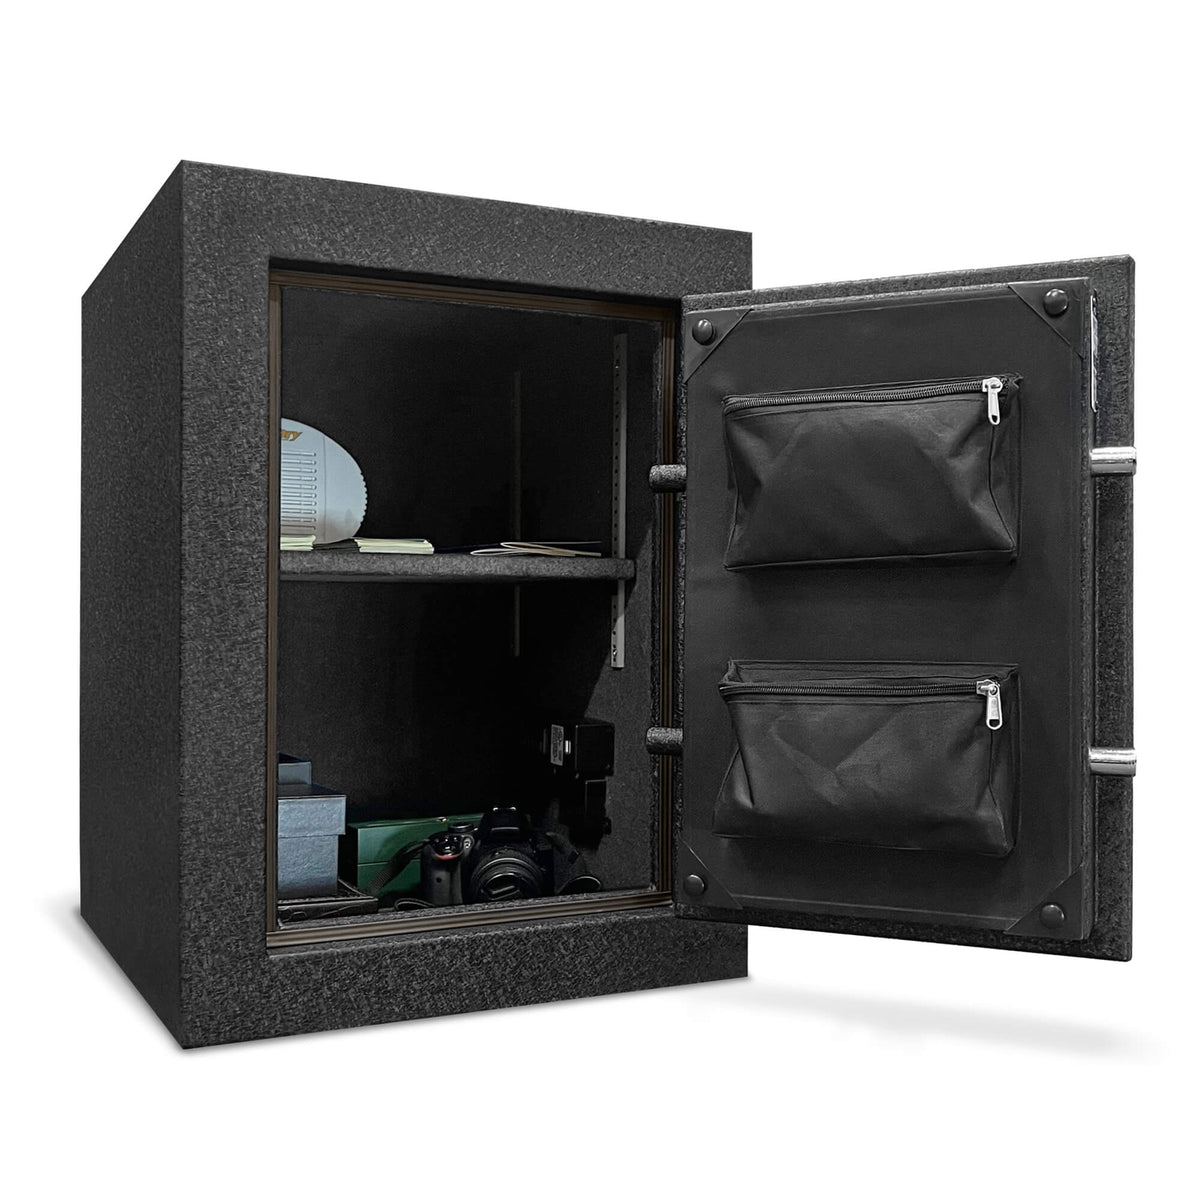 Stealth Essential Home Safe EHS4 Closed